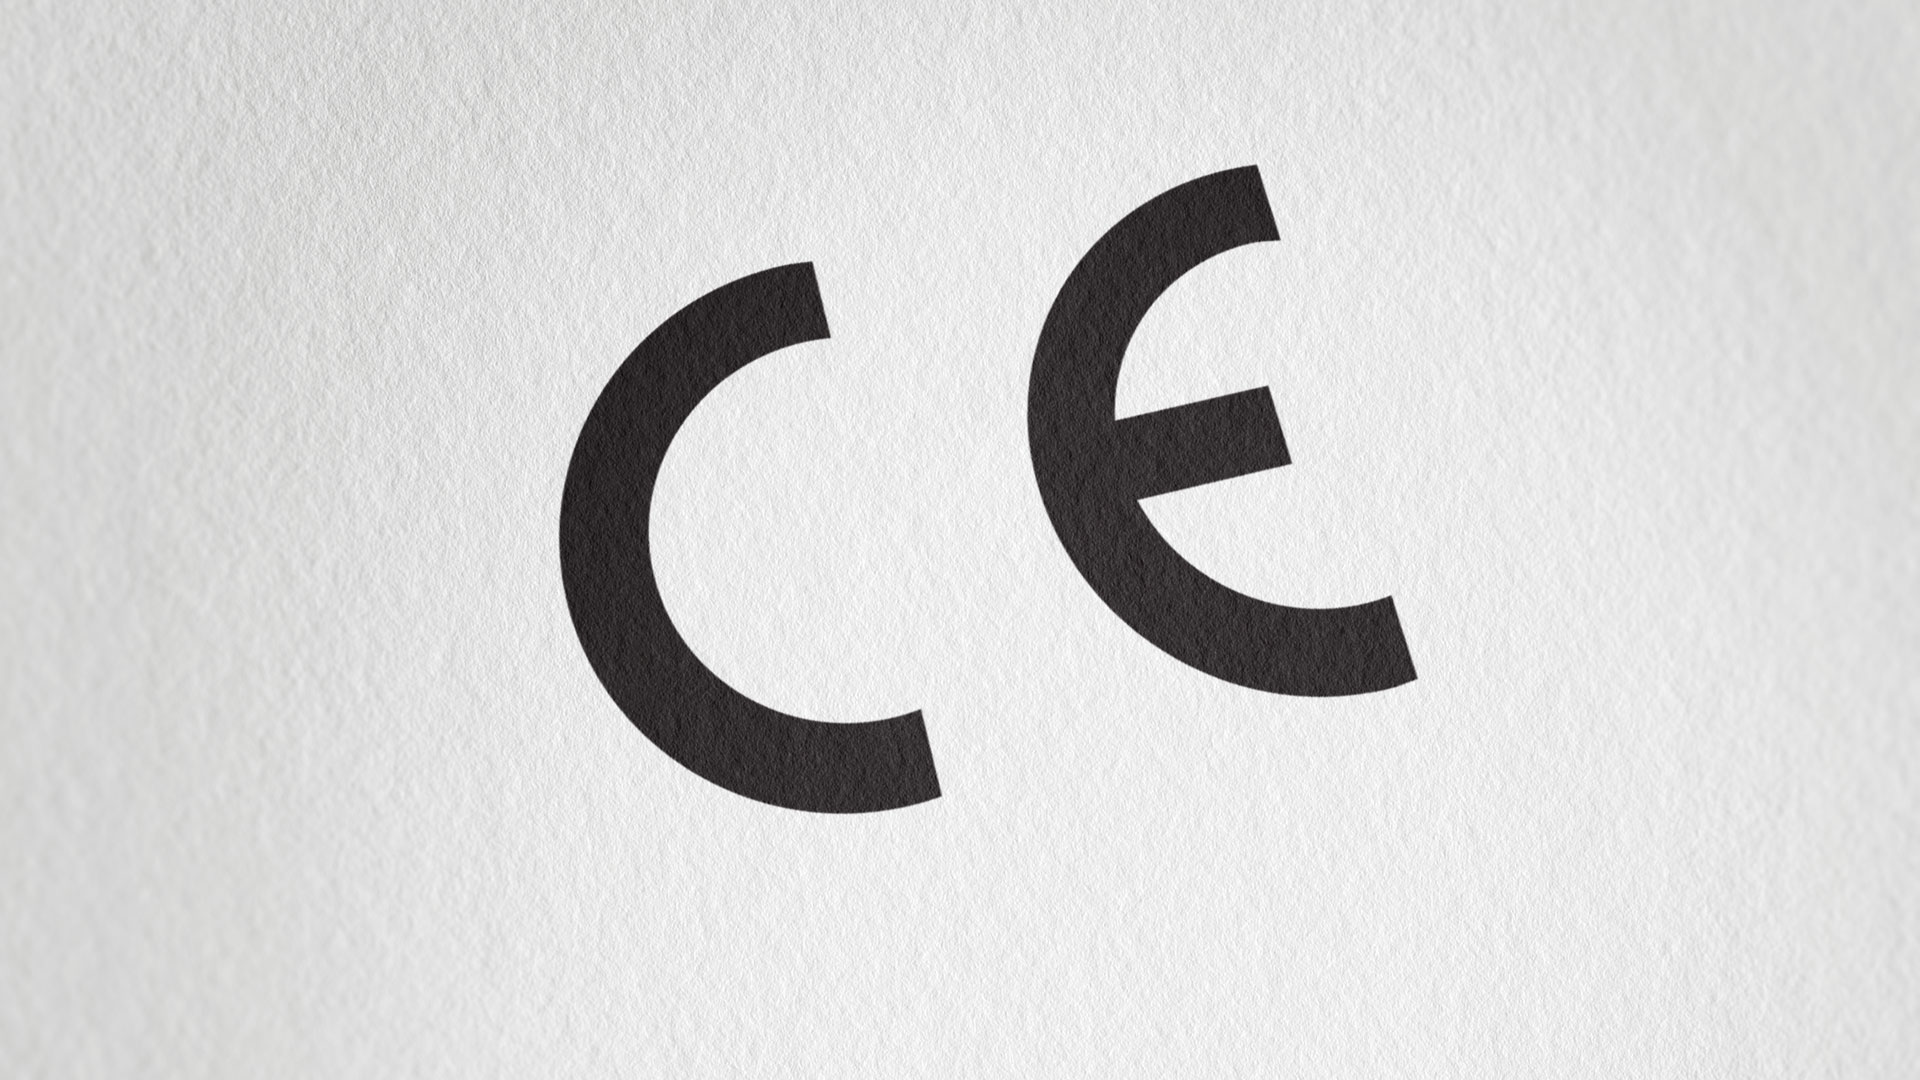 CE marking on products